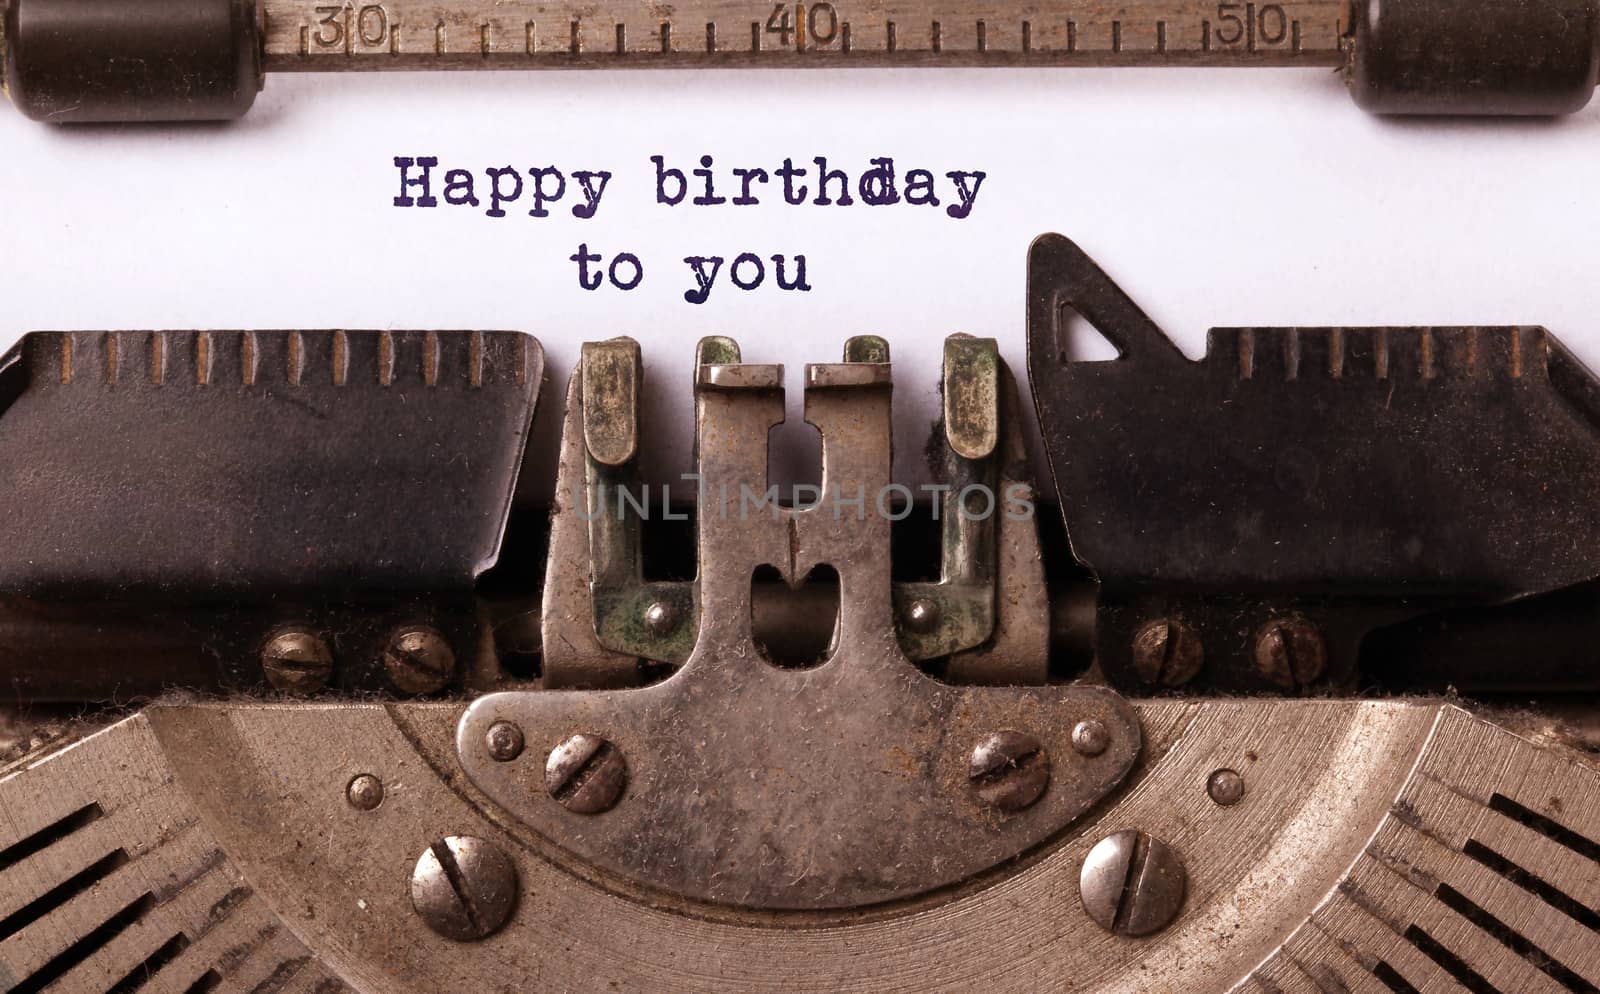 Happy birthday to you, written on an old typewriter by michaklootwijk